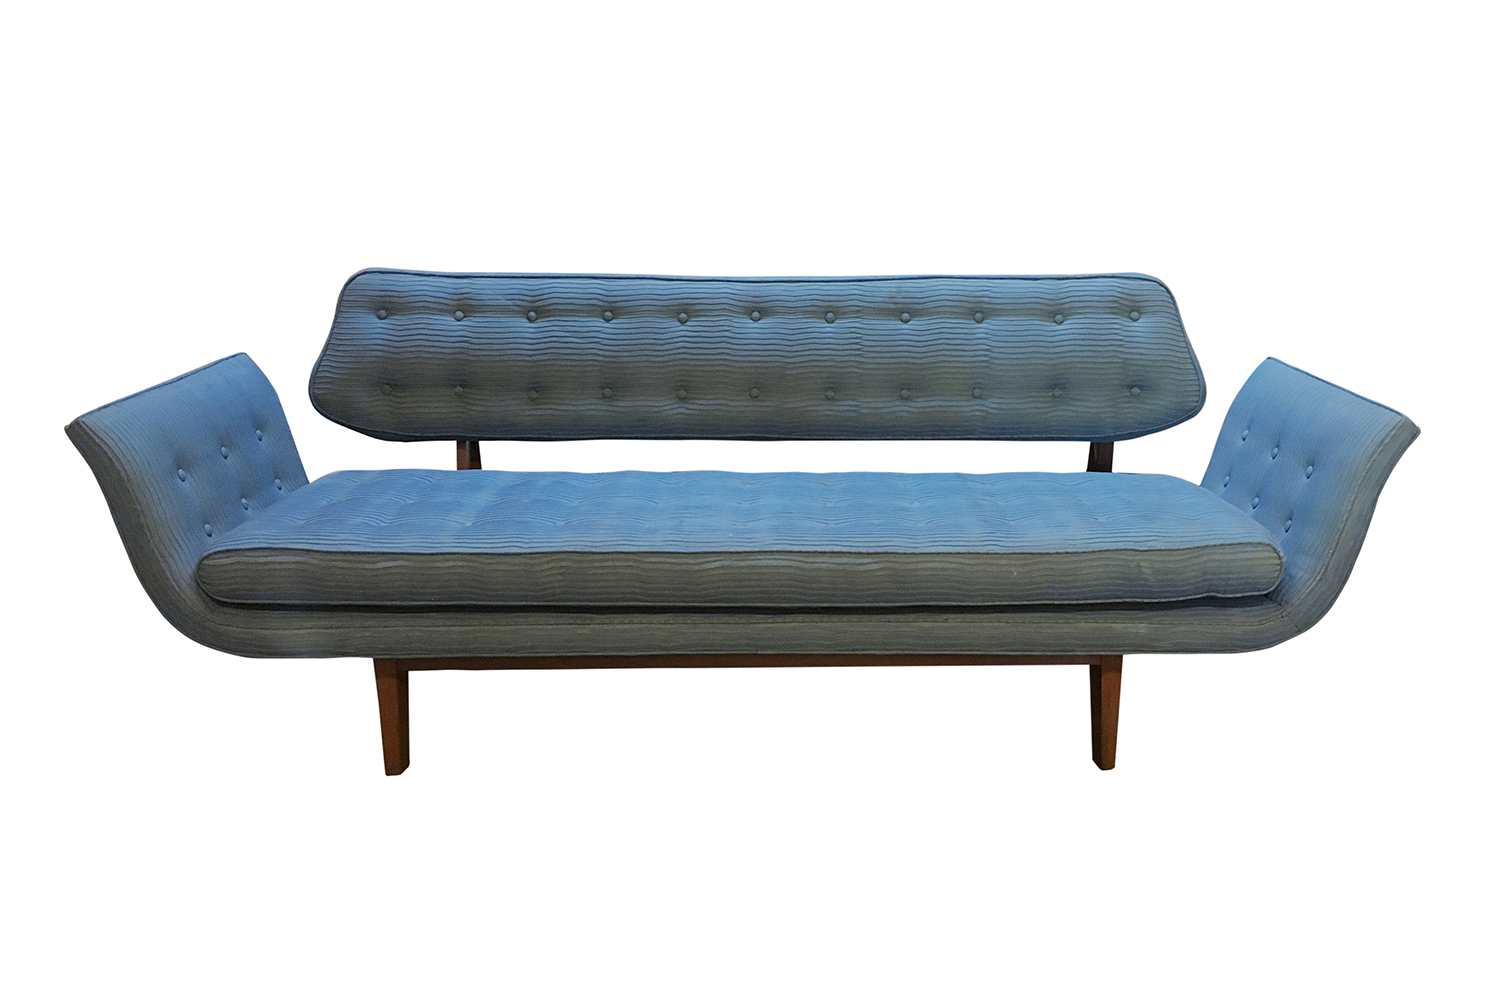 An Iconic Vintage Sofa Gets a Makeover — Revitaliste | Furniture ...